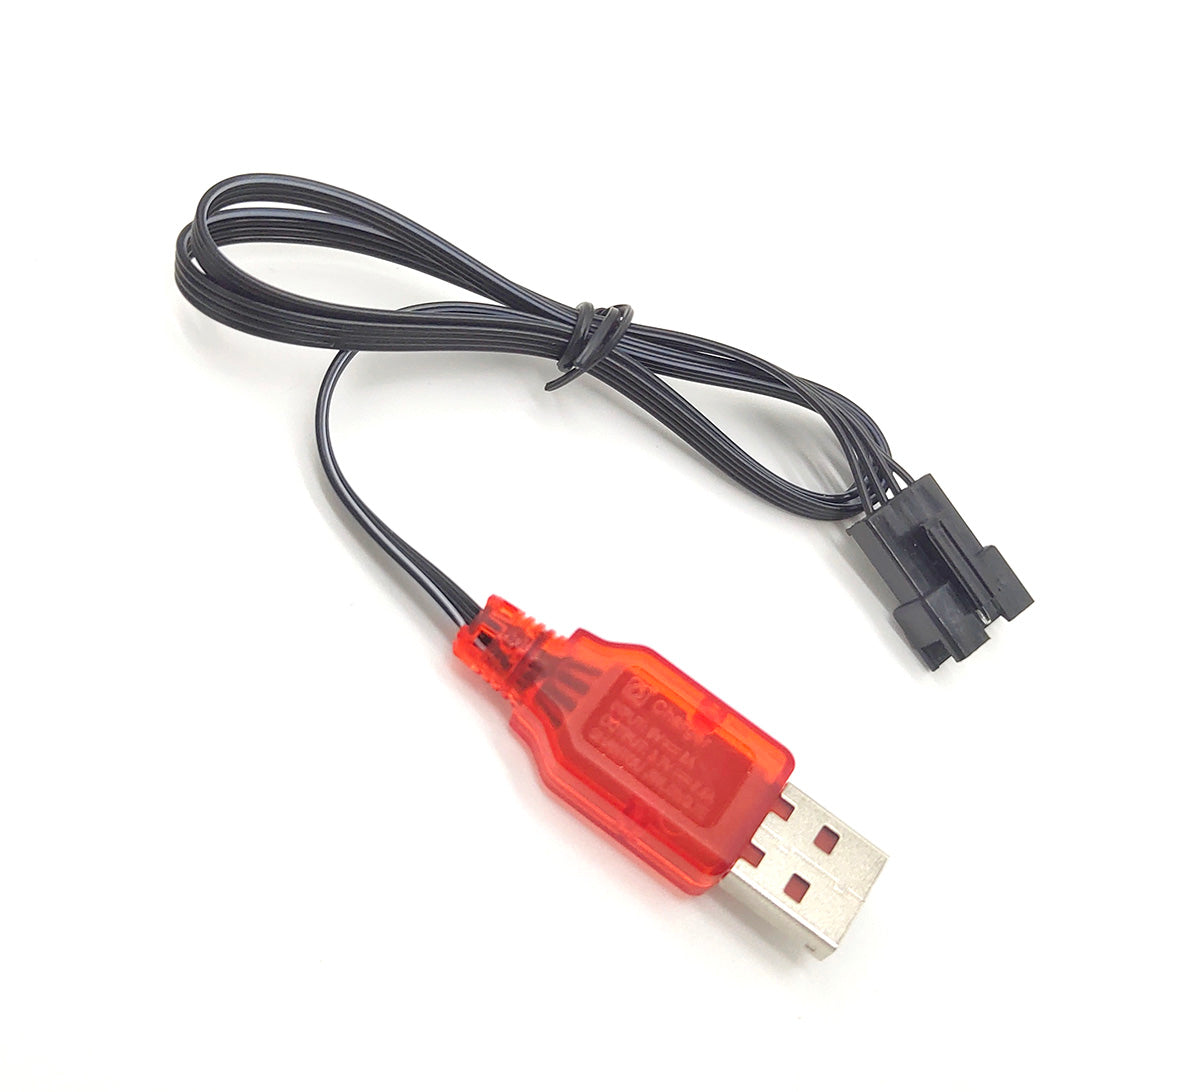 2S 7.4V USB Battery Charger - 4 Pins Version